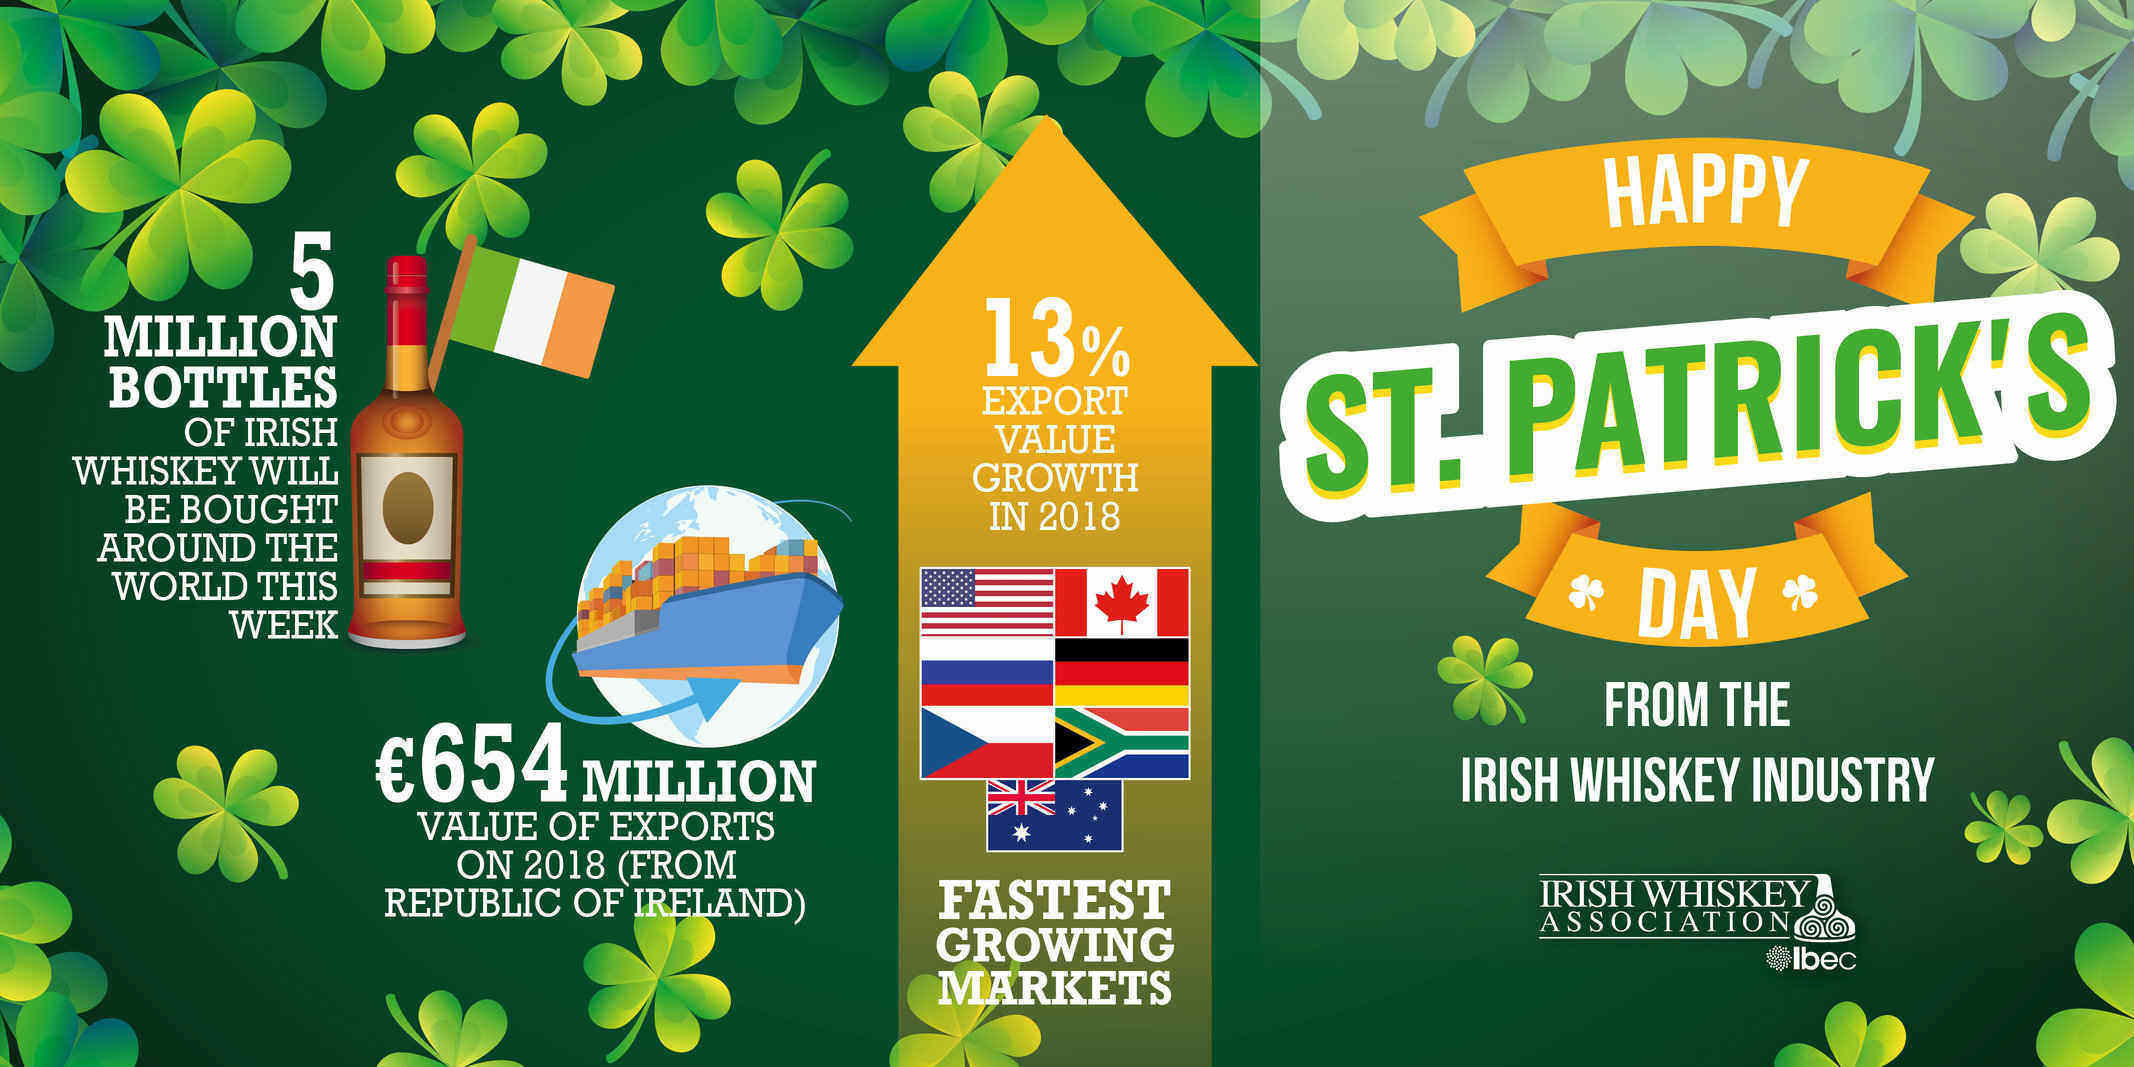 About five million bottles of Irish whiskey were sold in 135 markets just during St Patrick’s week.